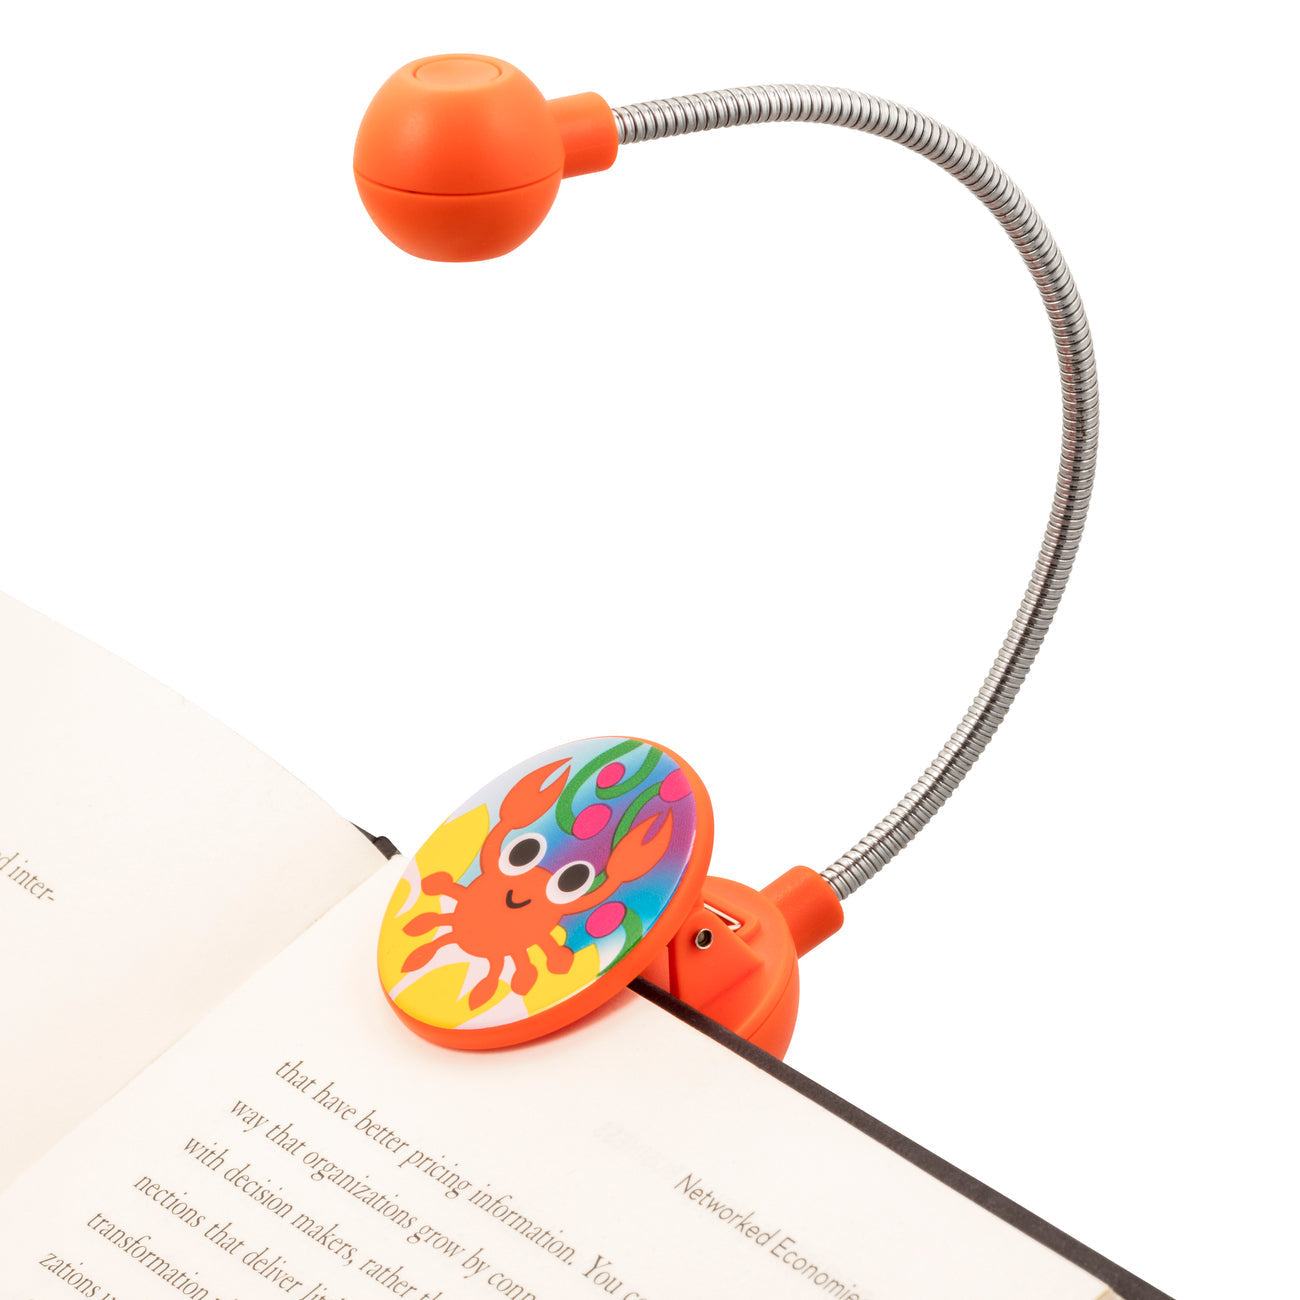 LED Disc Book and Reading Light by French Bull